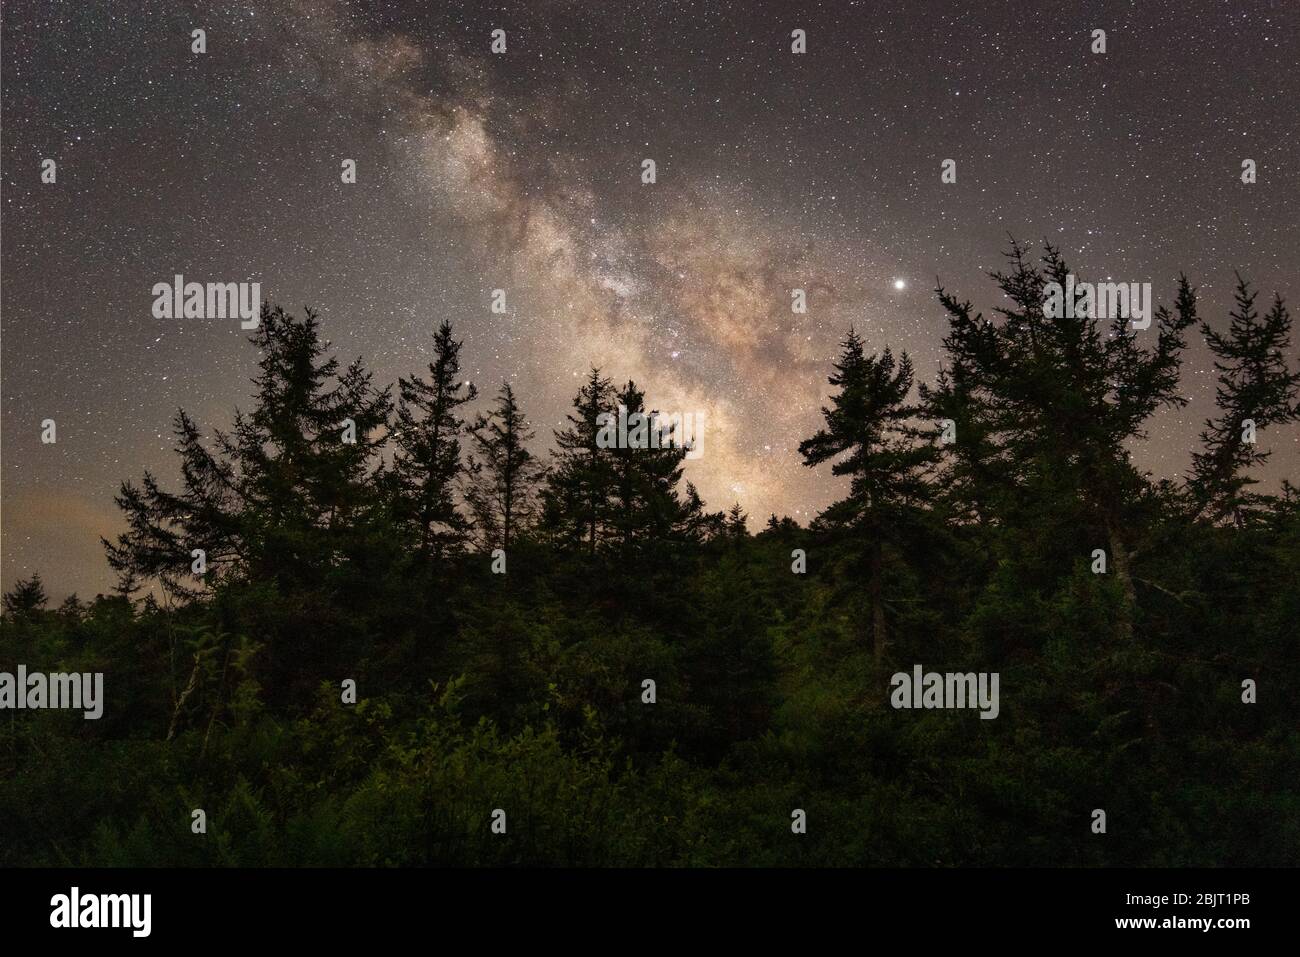 The Milky Way makes it's presence known above the dark and towering pines among the primeval lush vegetation of the Cranberry Glades Stock Photo